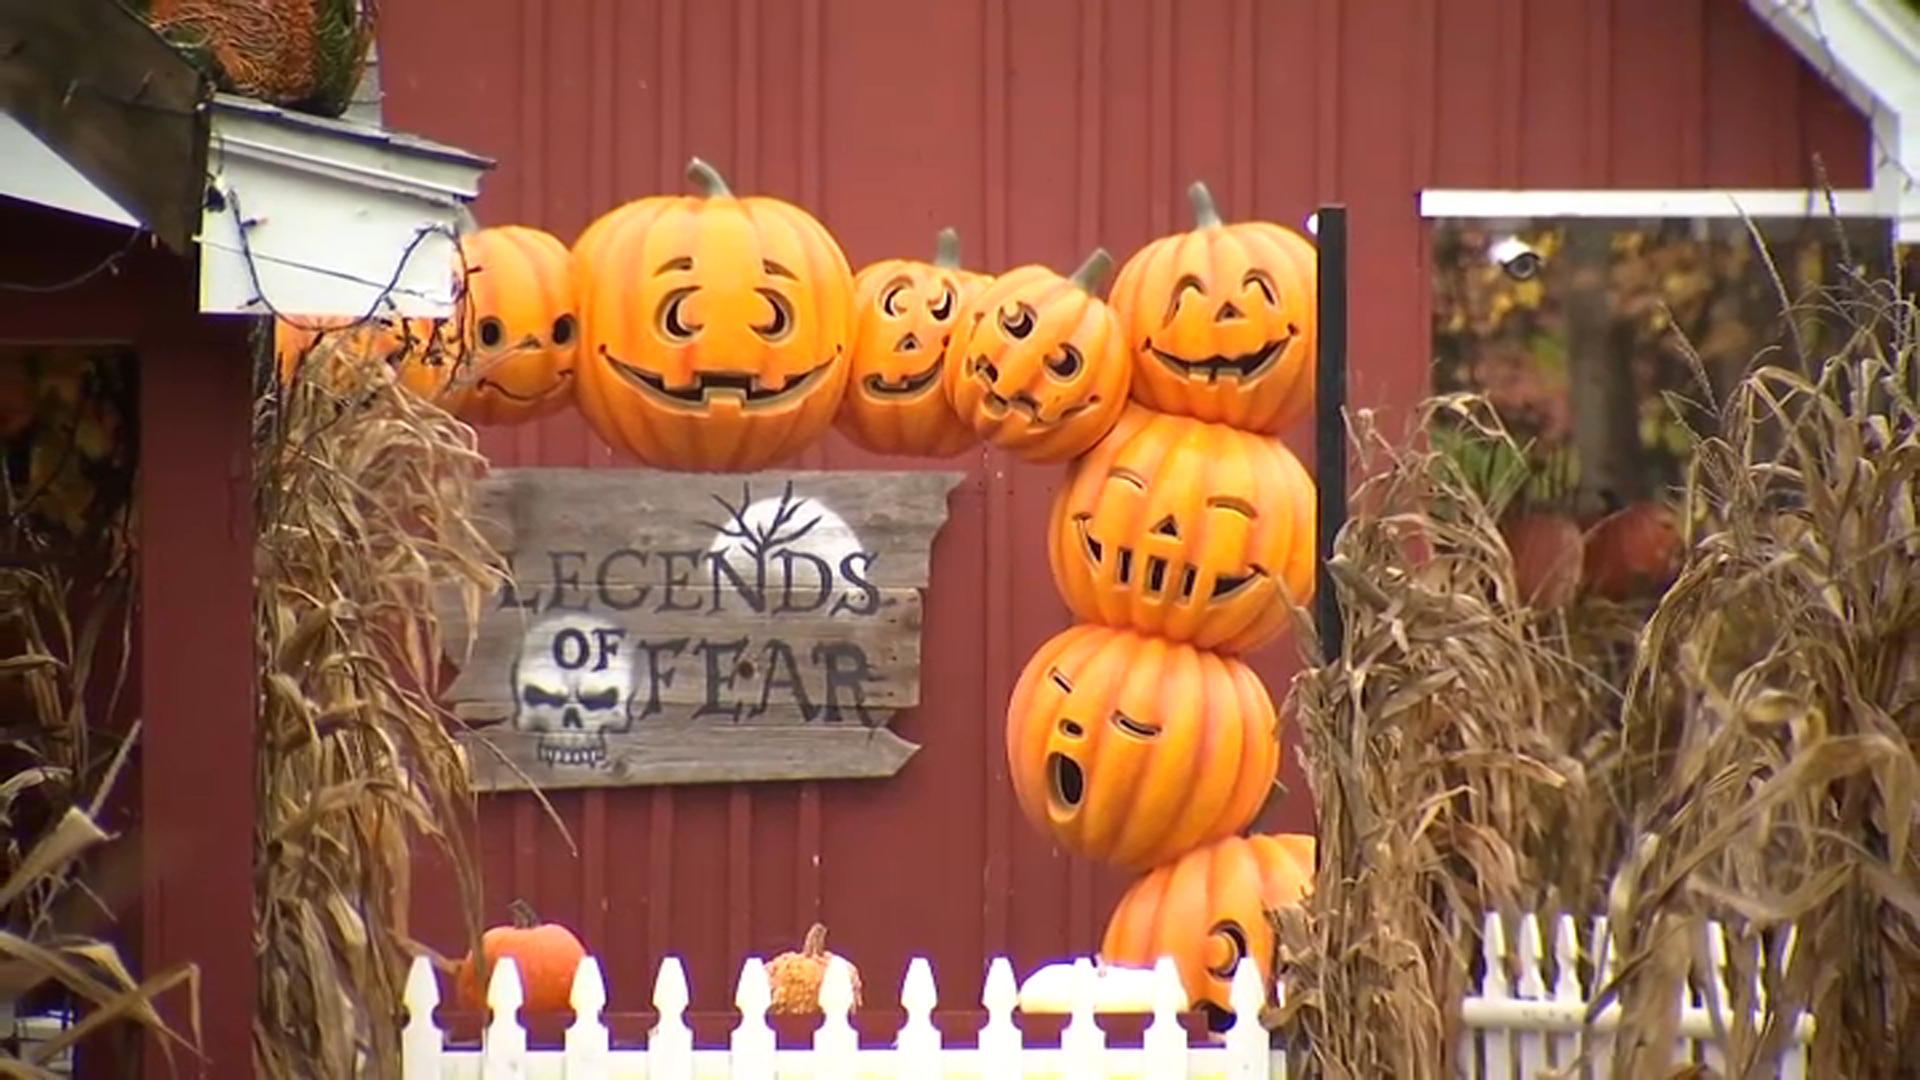 CT Halloween Attraction Displays a Murdered Police Officer – NBC Connecticut